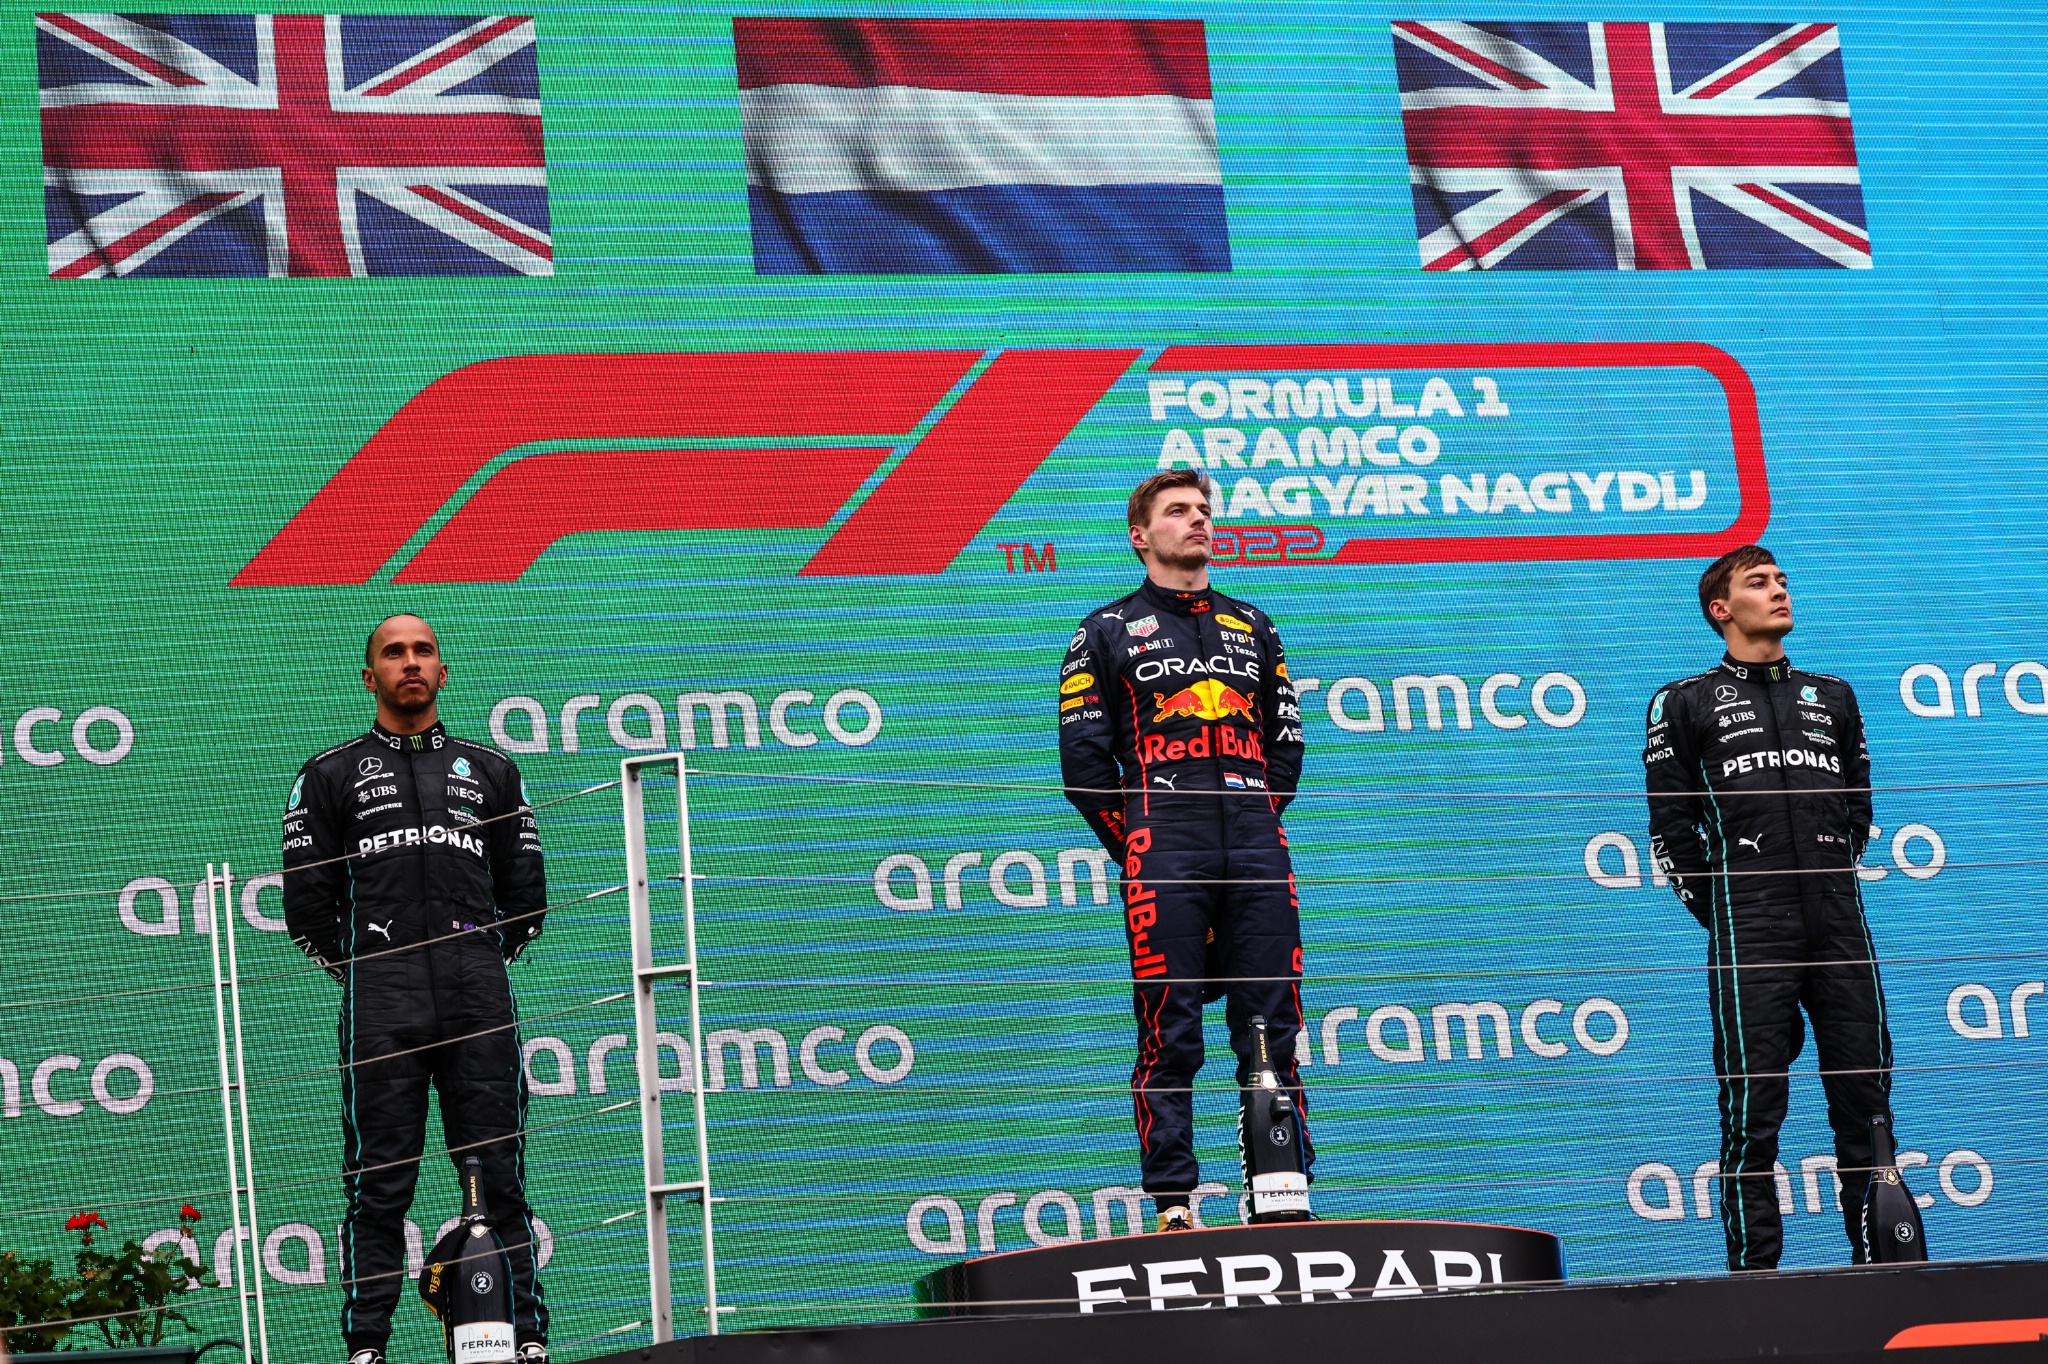 Lewis Hamilton (GBR), Mercedes AMG F1 Max Verstappen (NLD), Red Bull Racing George Russell (GBR), Mercedes AMG F1 Formula